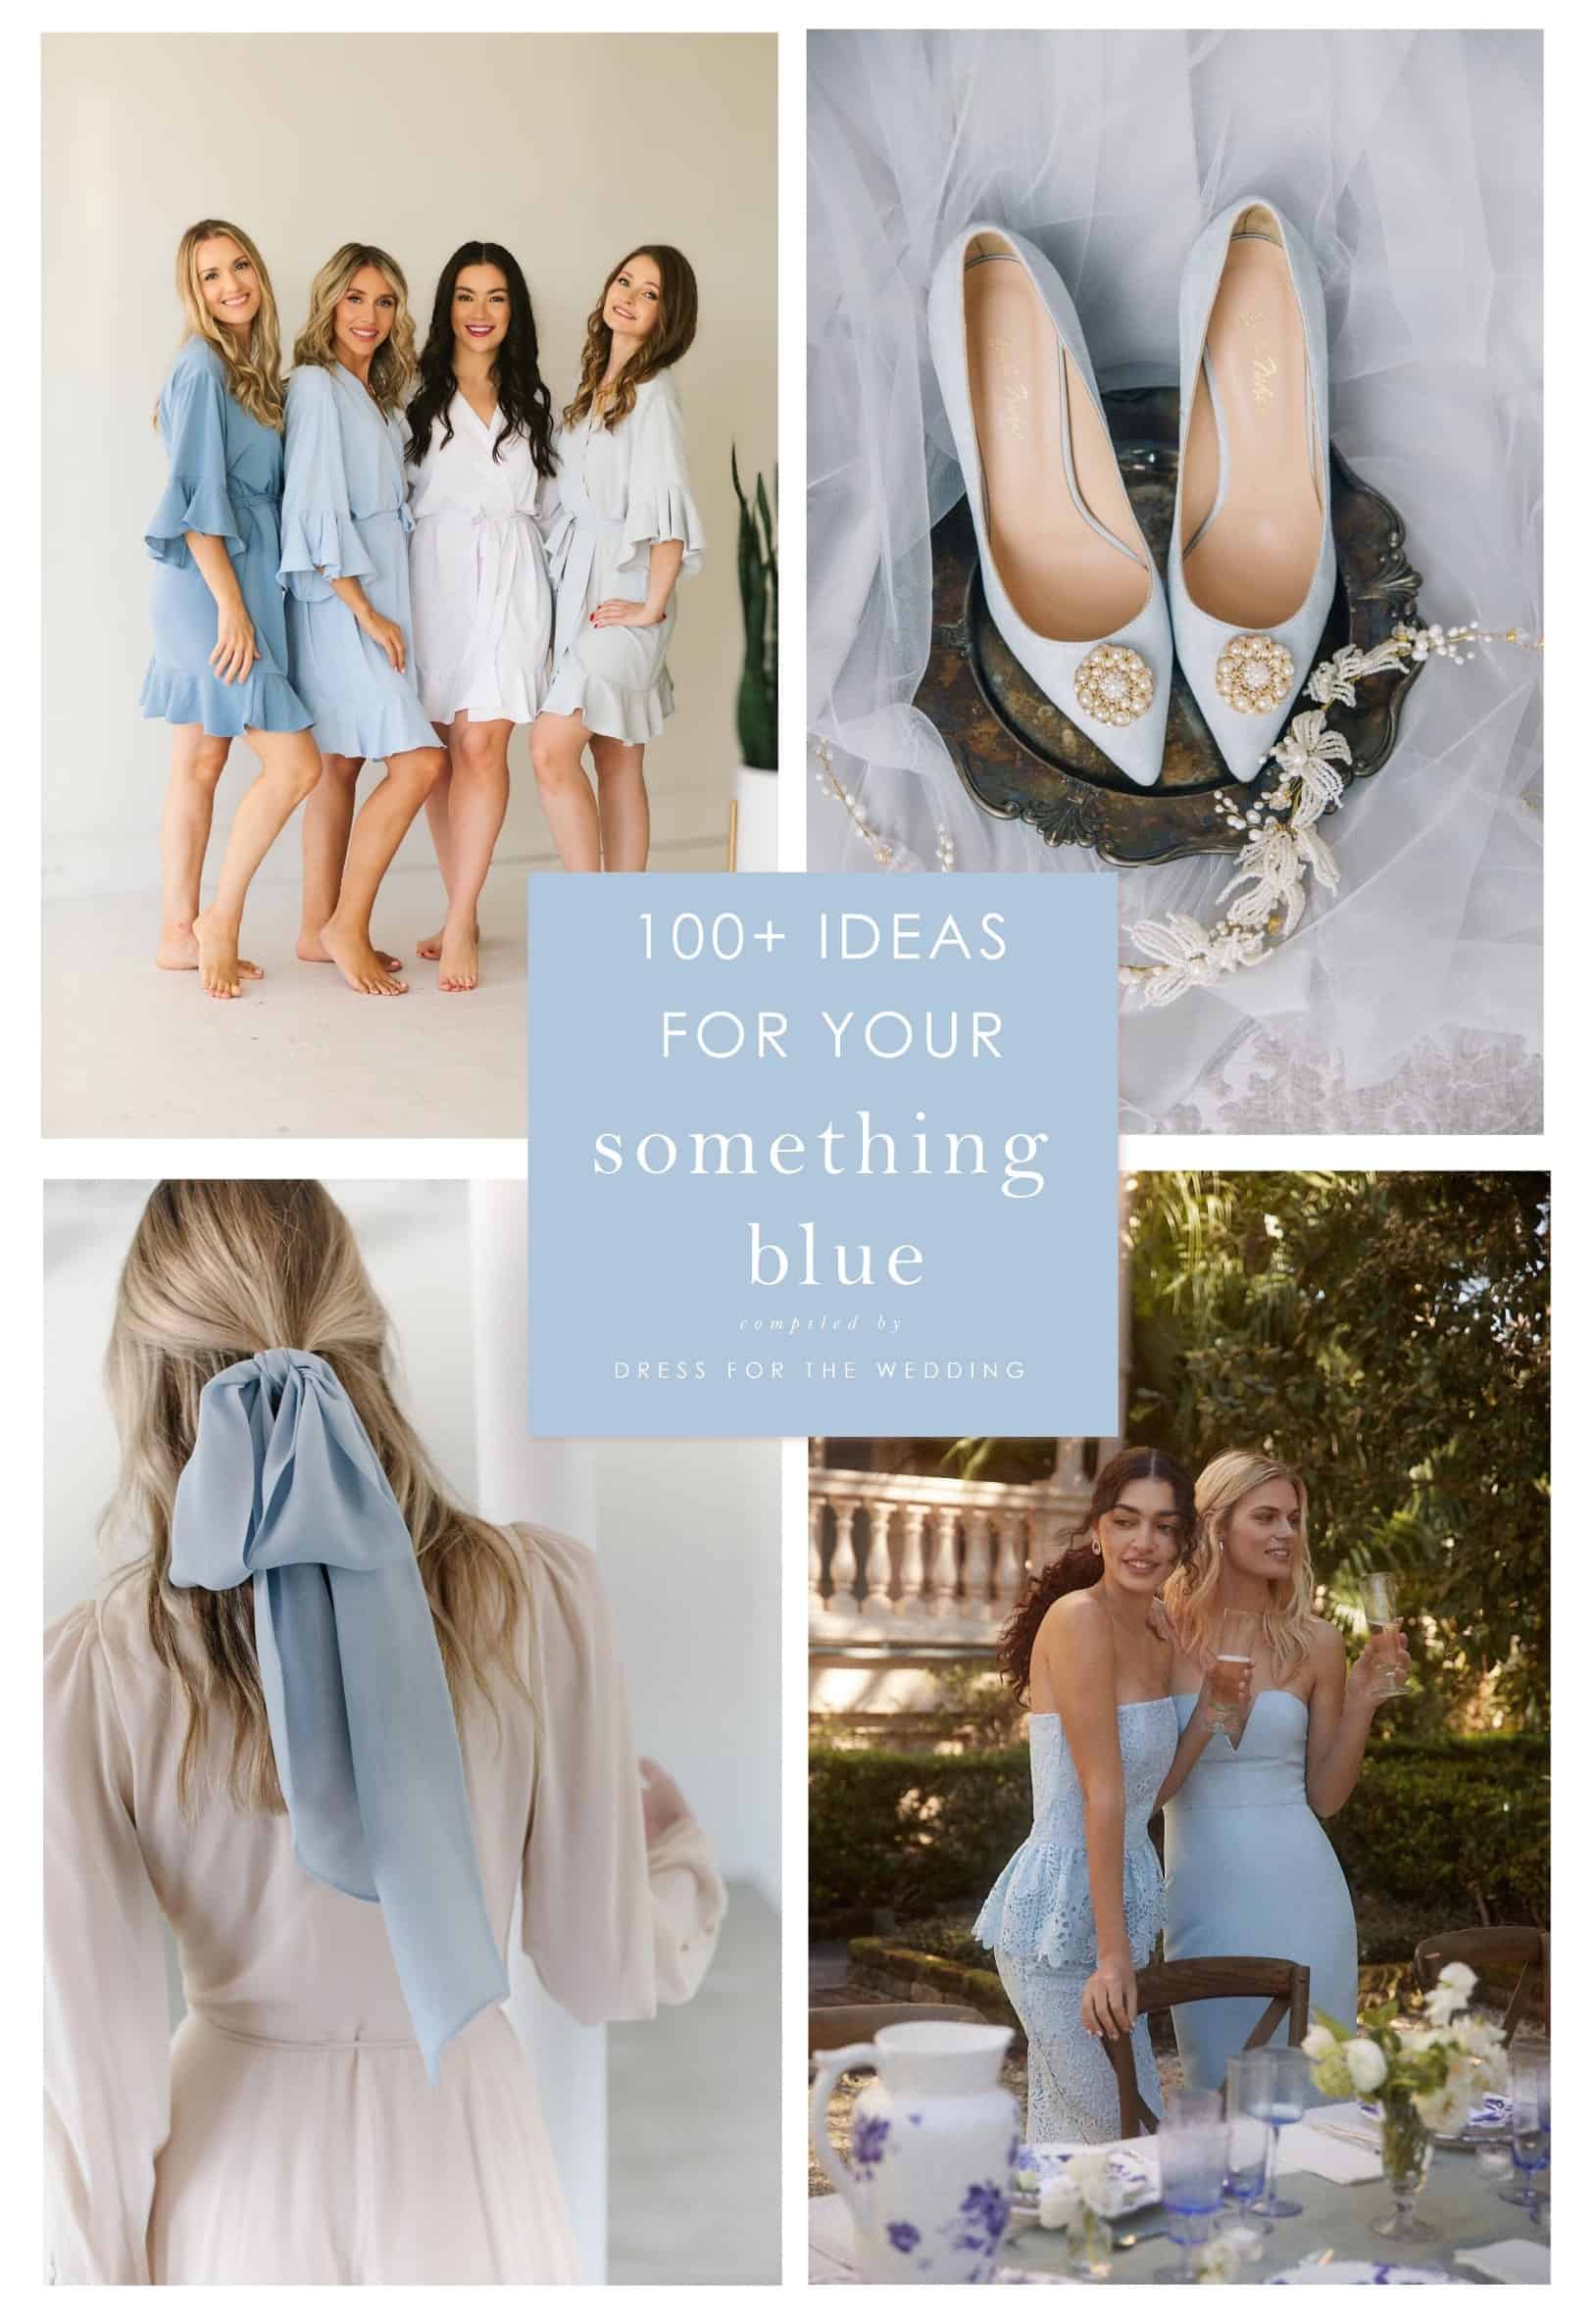 Dusty Blue and Powder Blue Wedding Color Palette - Robes by